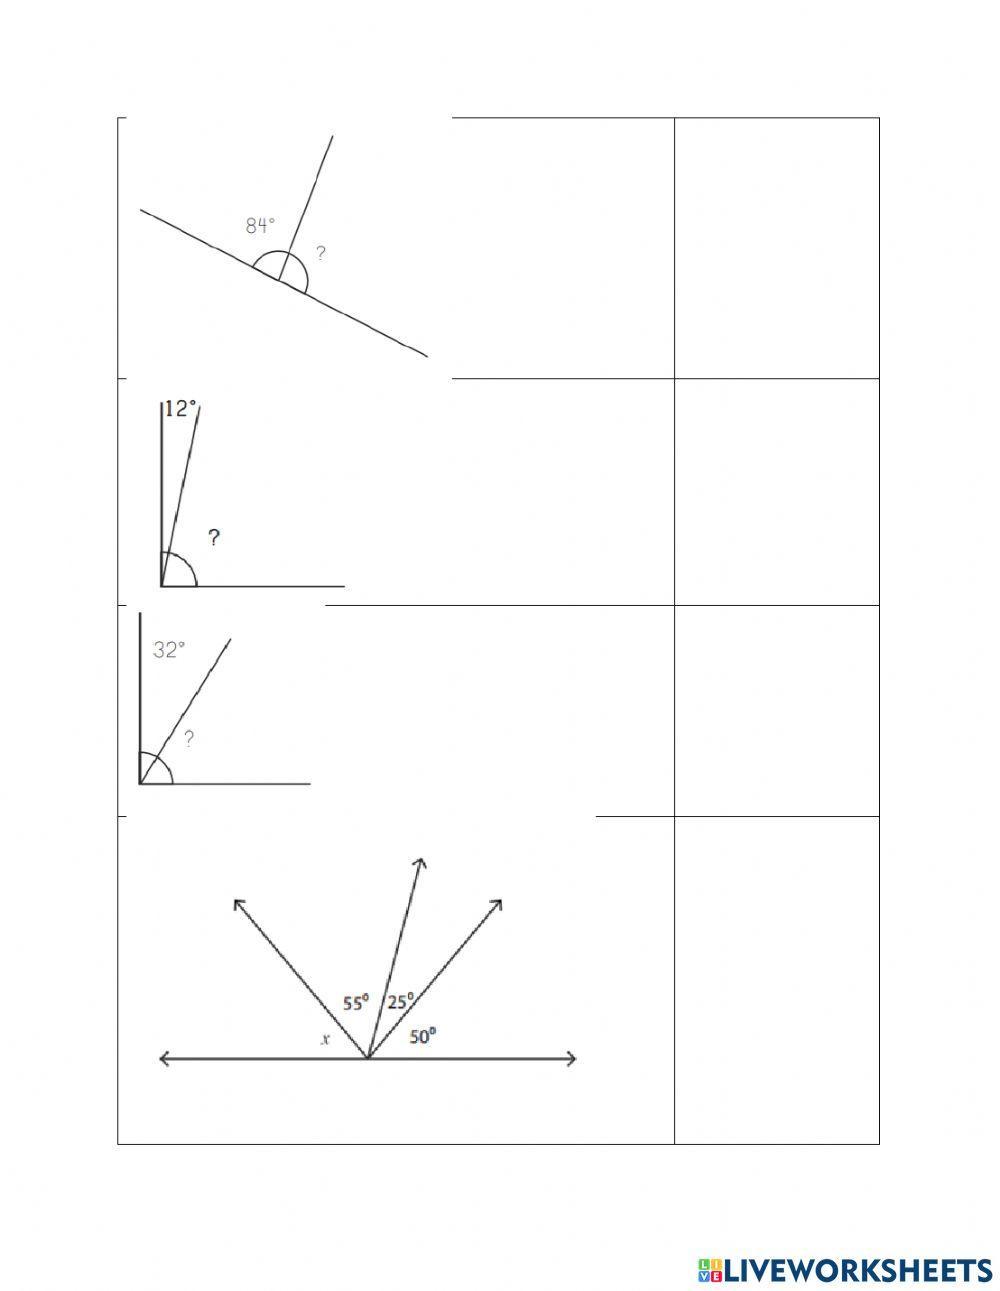 Year 5 Term 3 Week 3 - Identifying missing angles